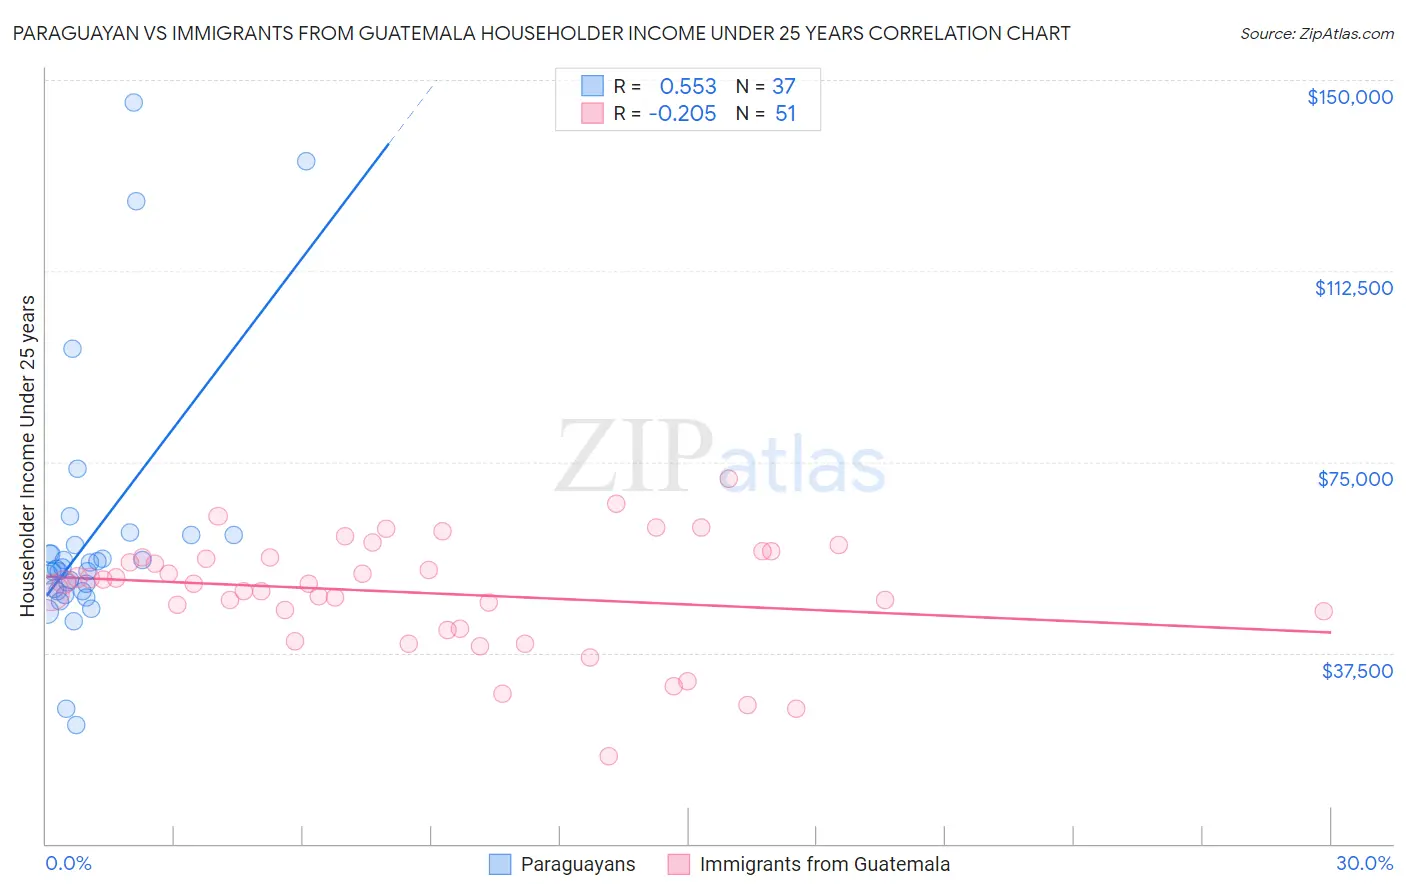 Paraguayan vs Immigrants from Guatemala Householder Income Under 25 years